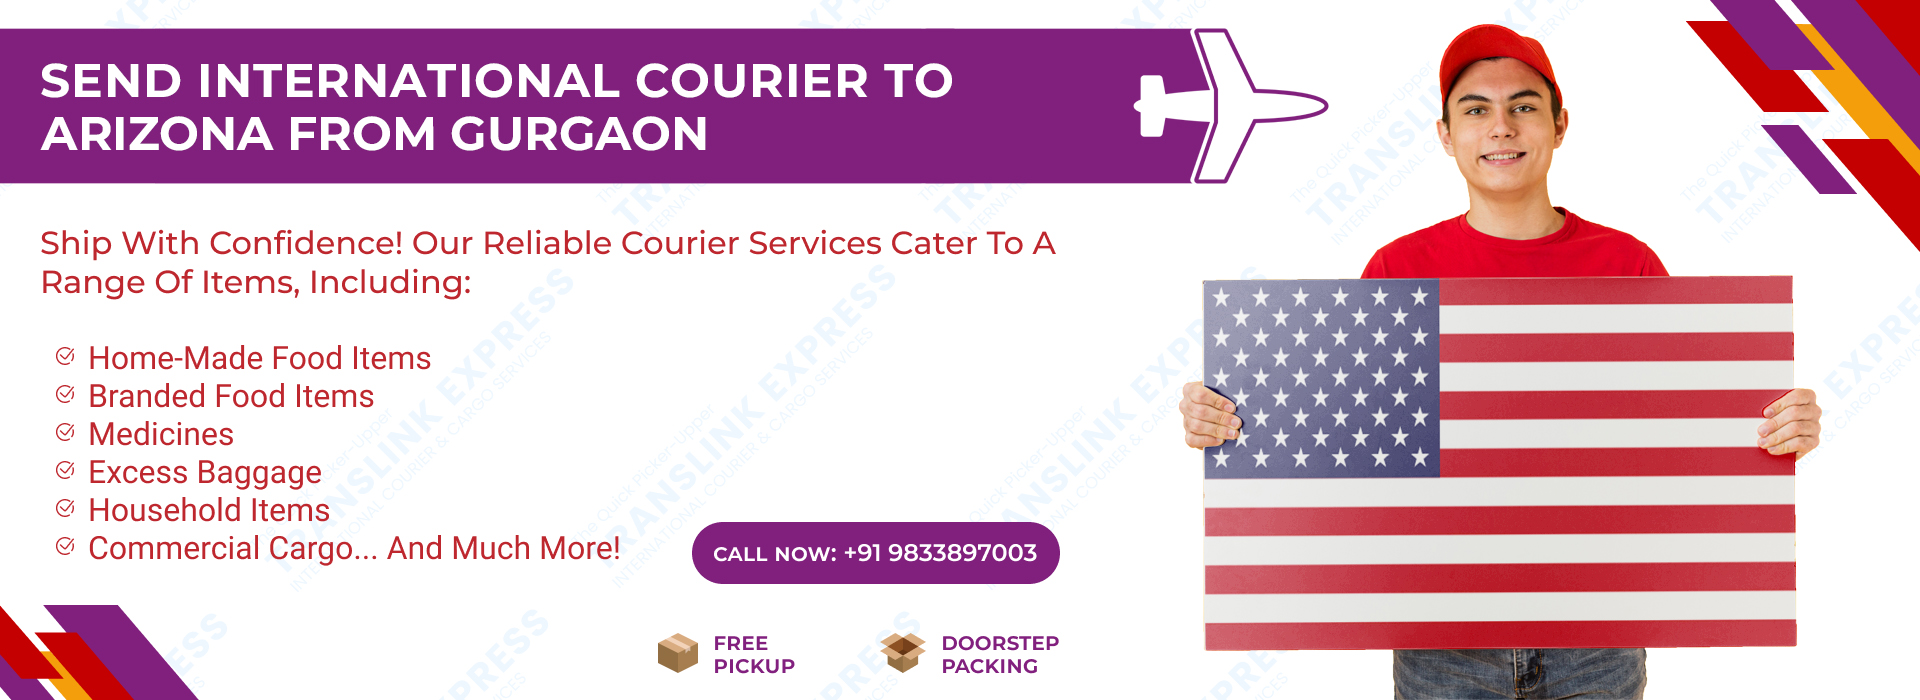 Courier to Arizona From Gurgaon